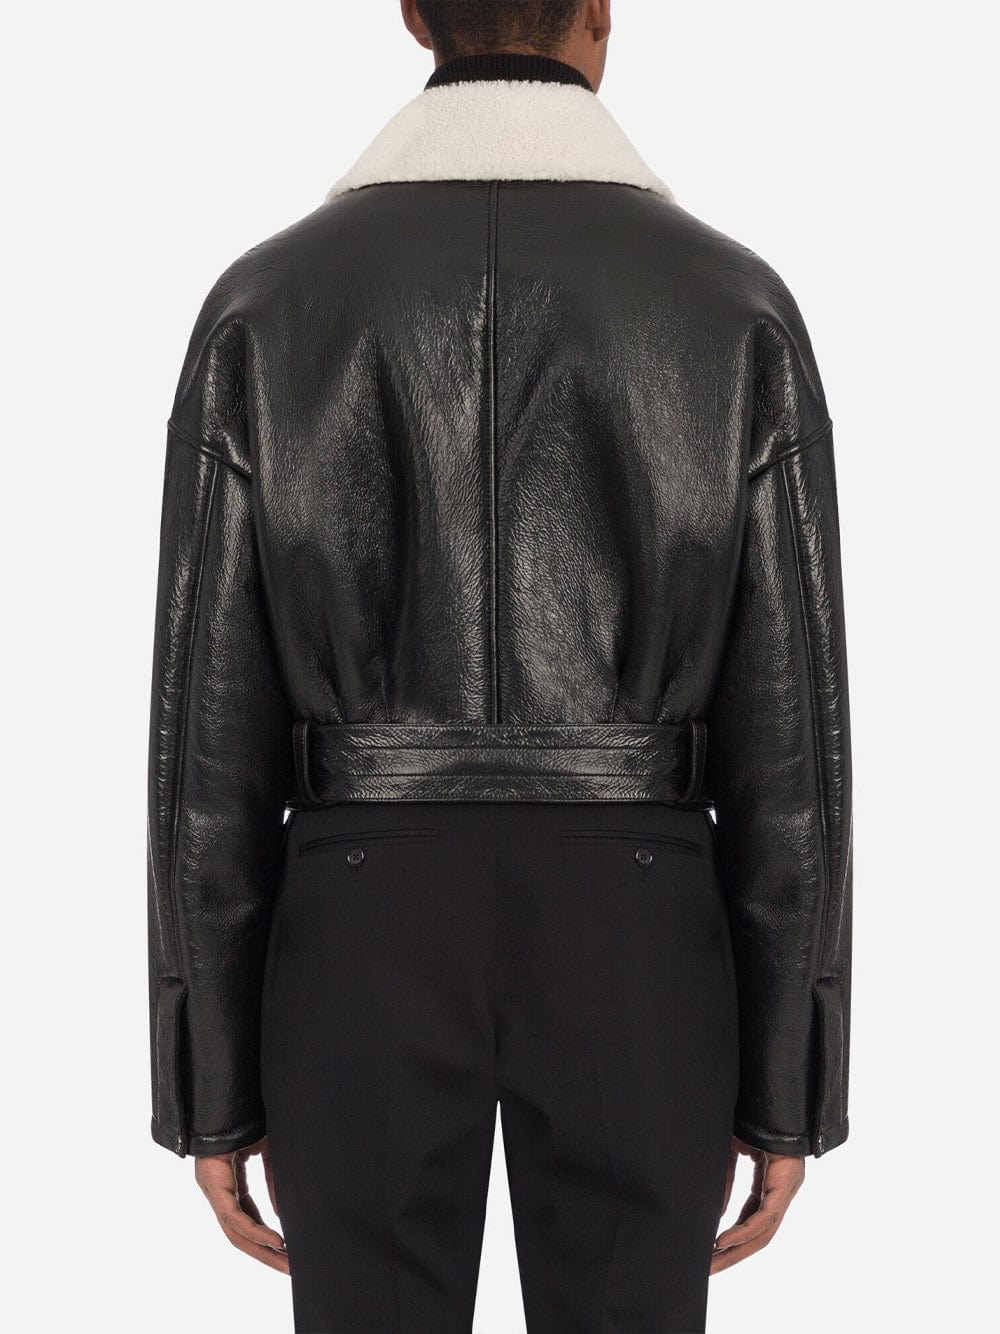 Dolce & Gabbana Leather Jacket With Shearling Collar